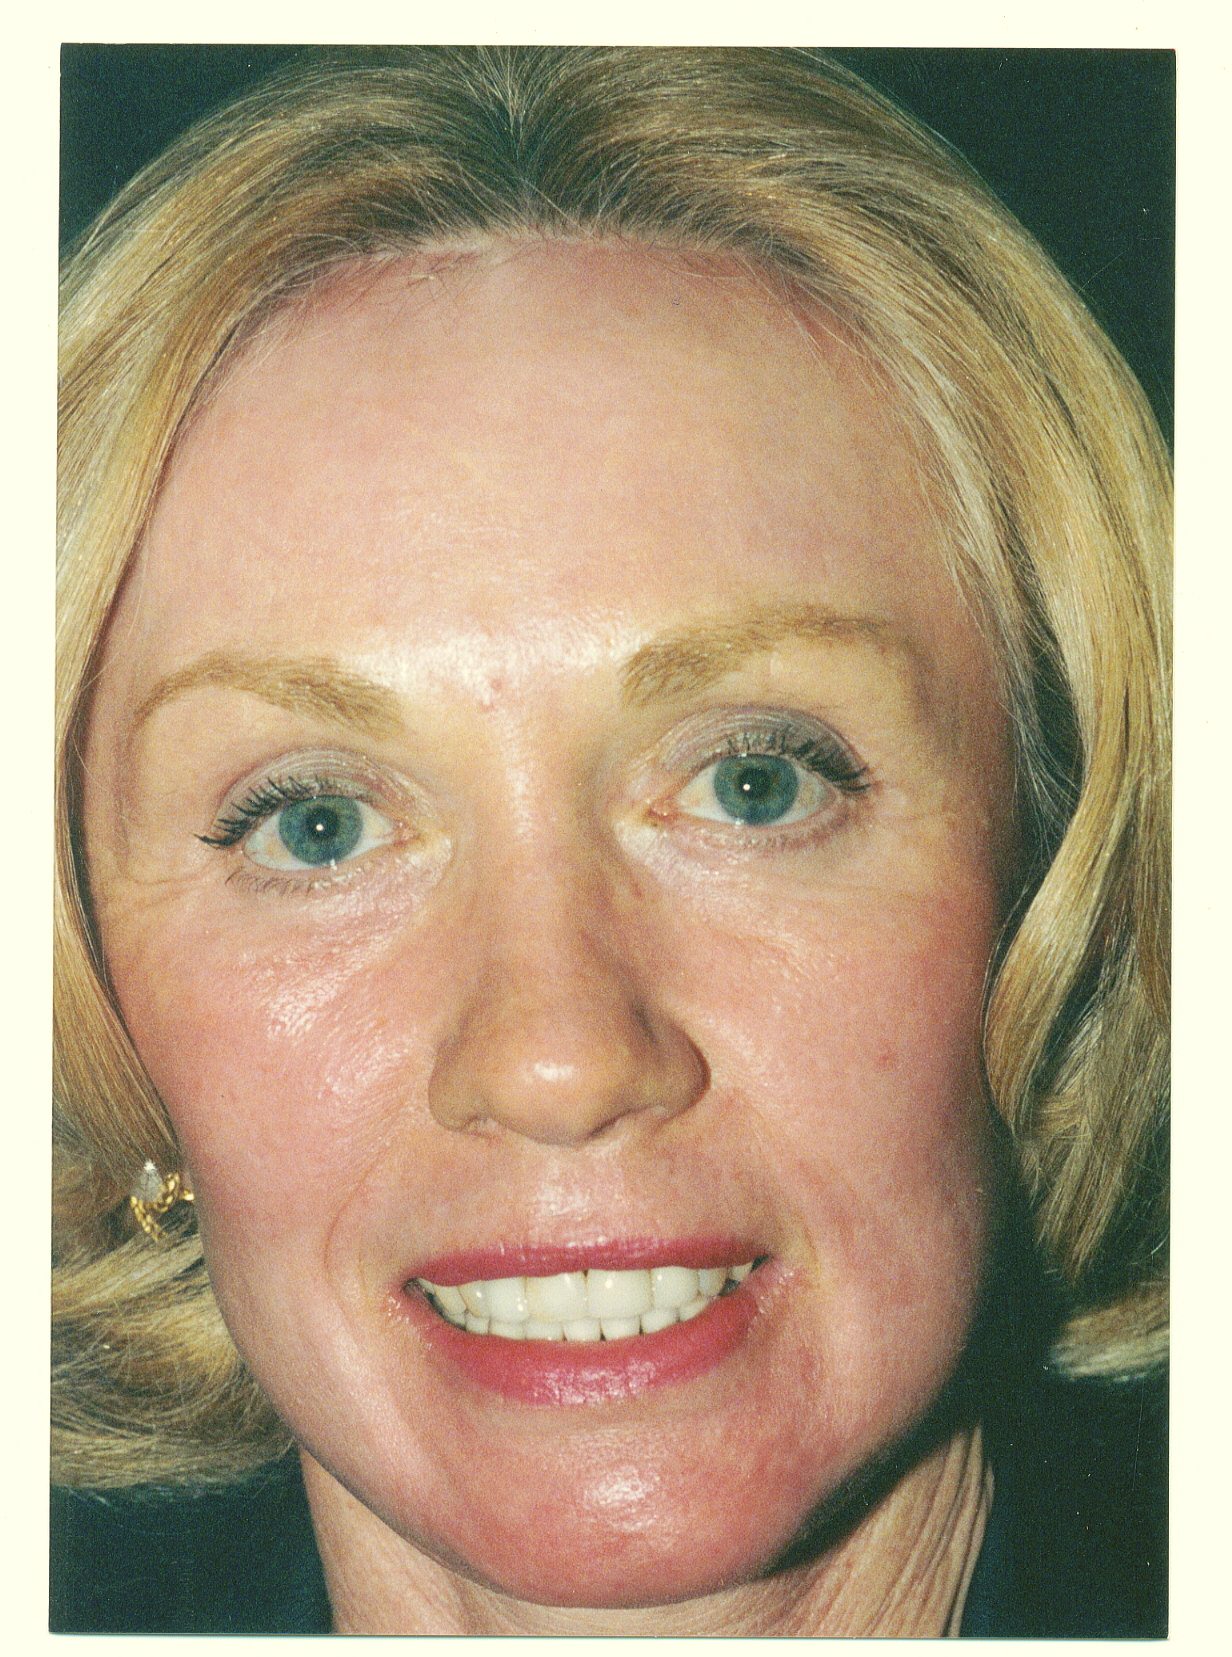 Full Facelift including browlift,eyelid surgery and Laser resurface - After